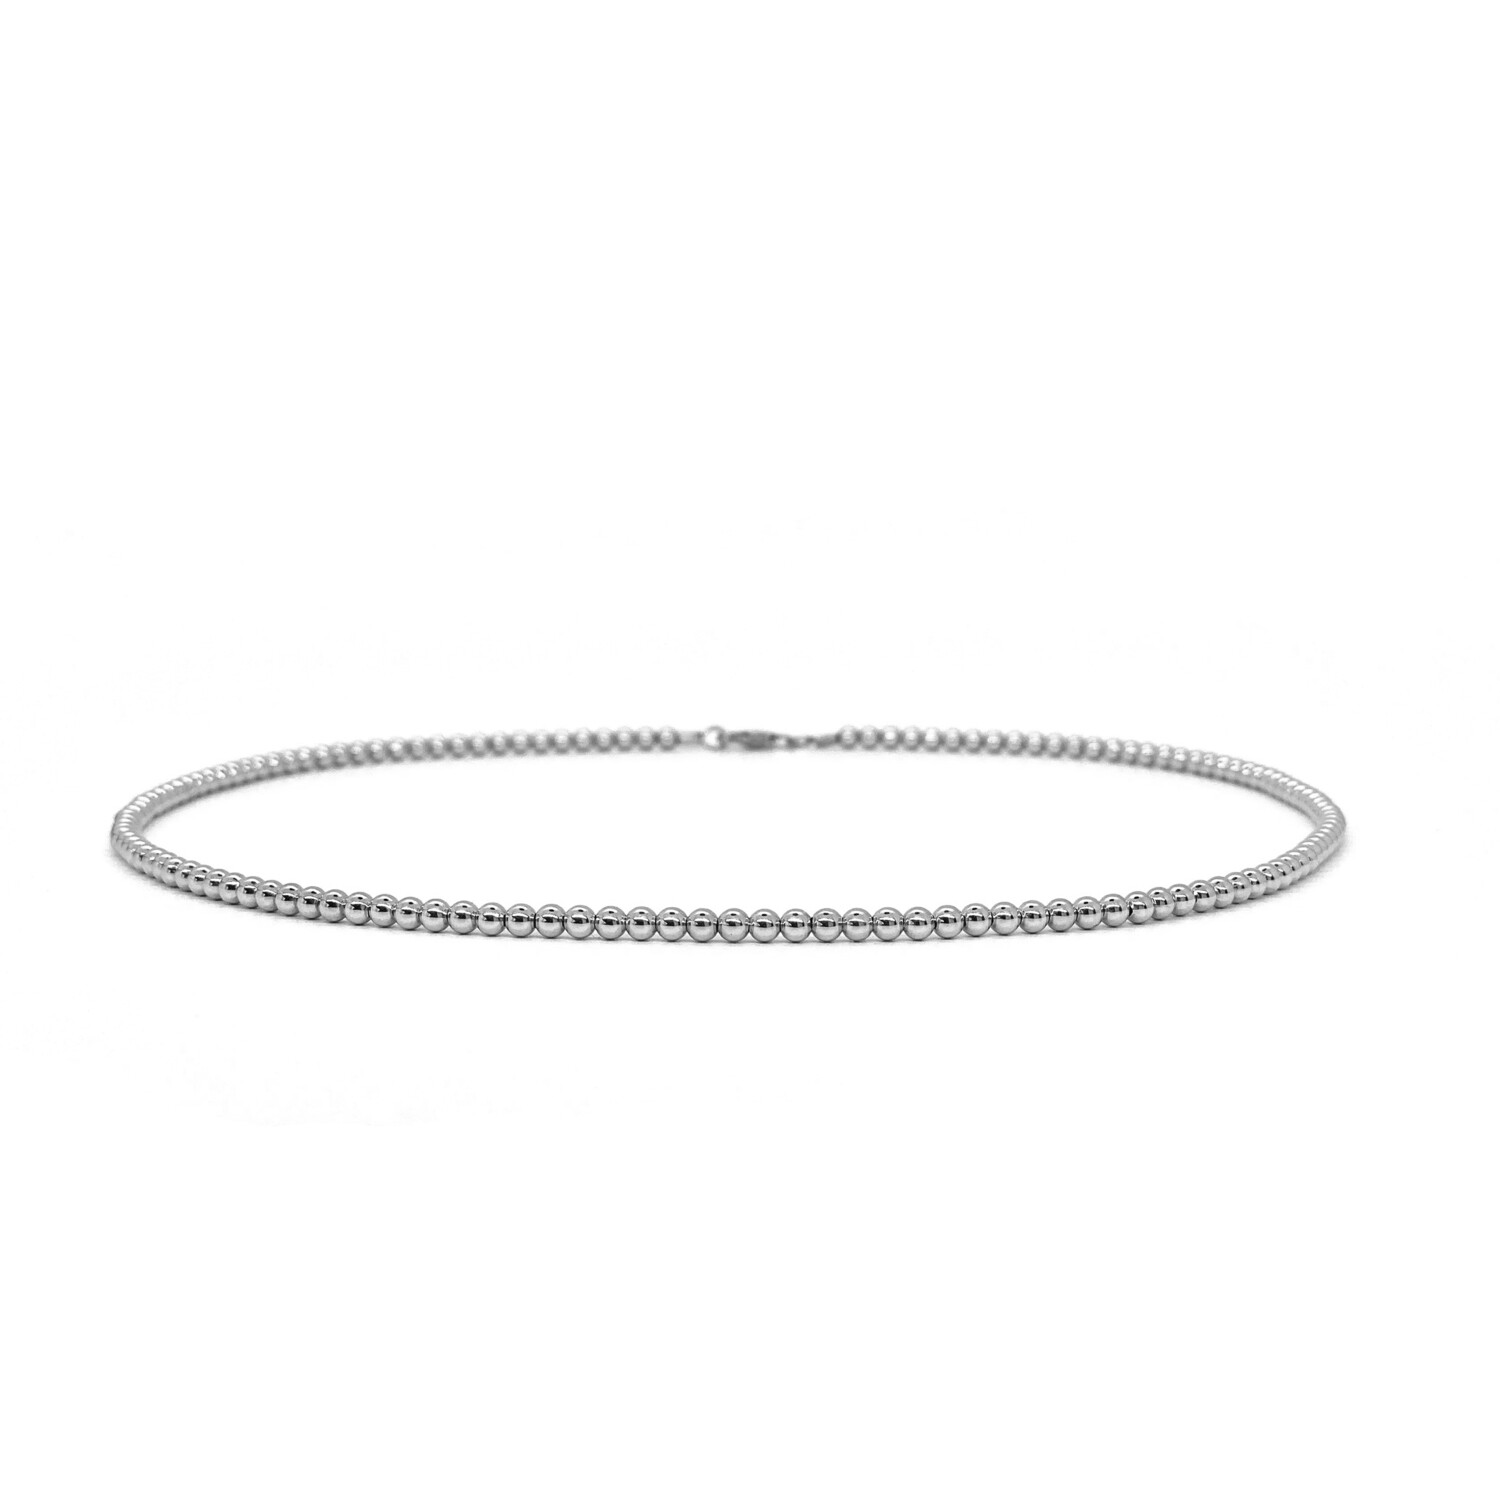 3MM STERLING SILVER NECKLACE